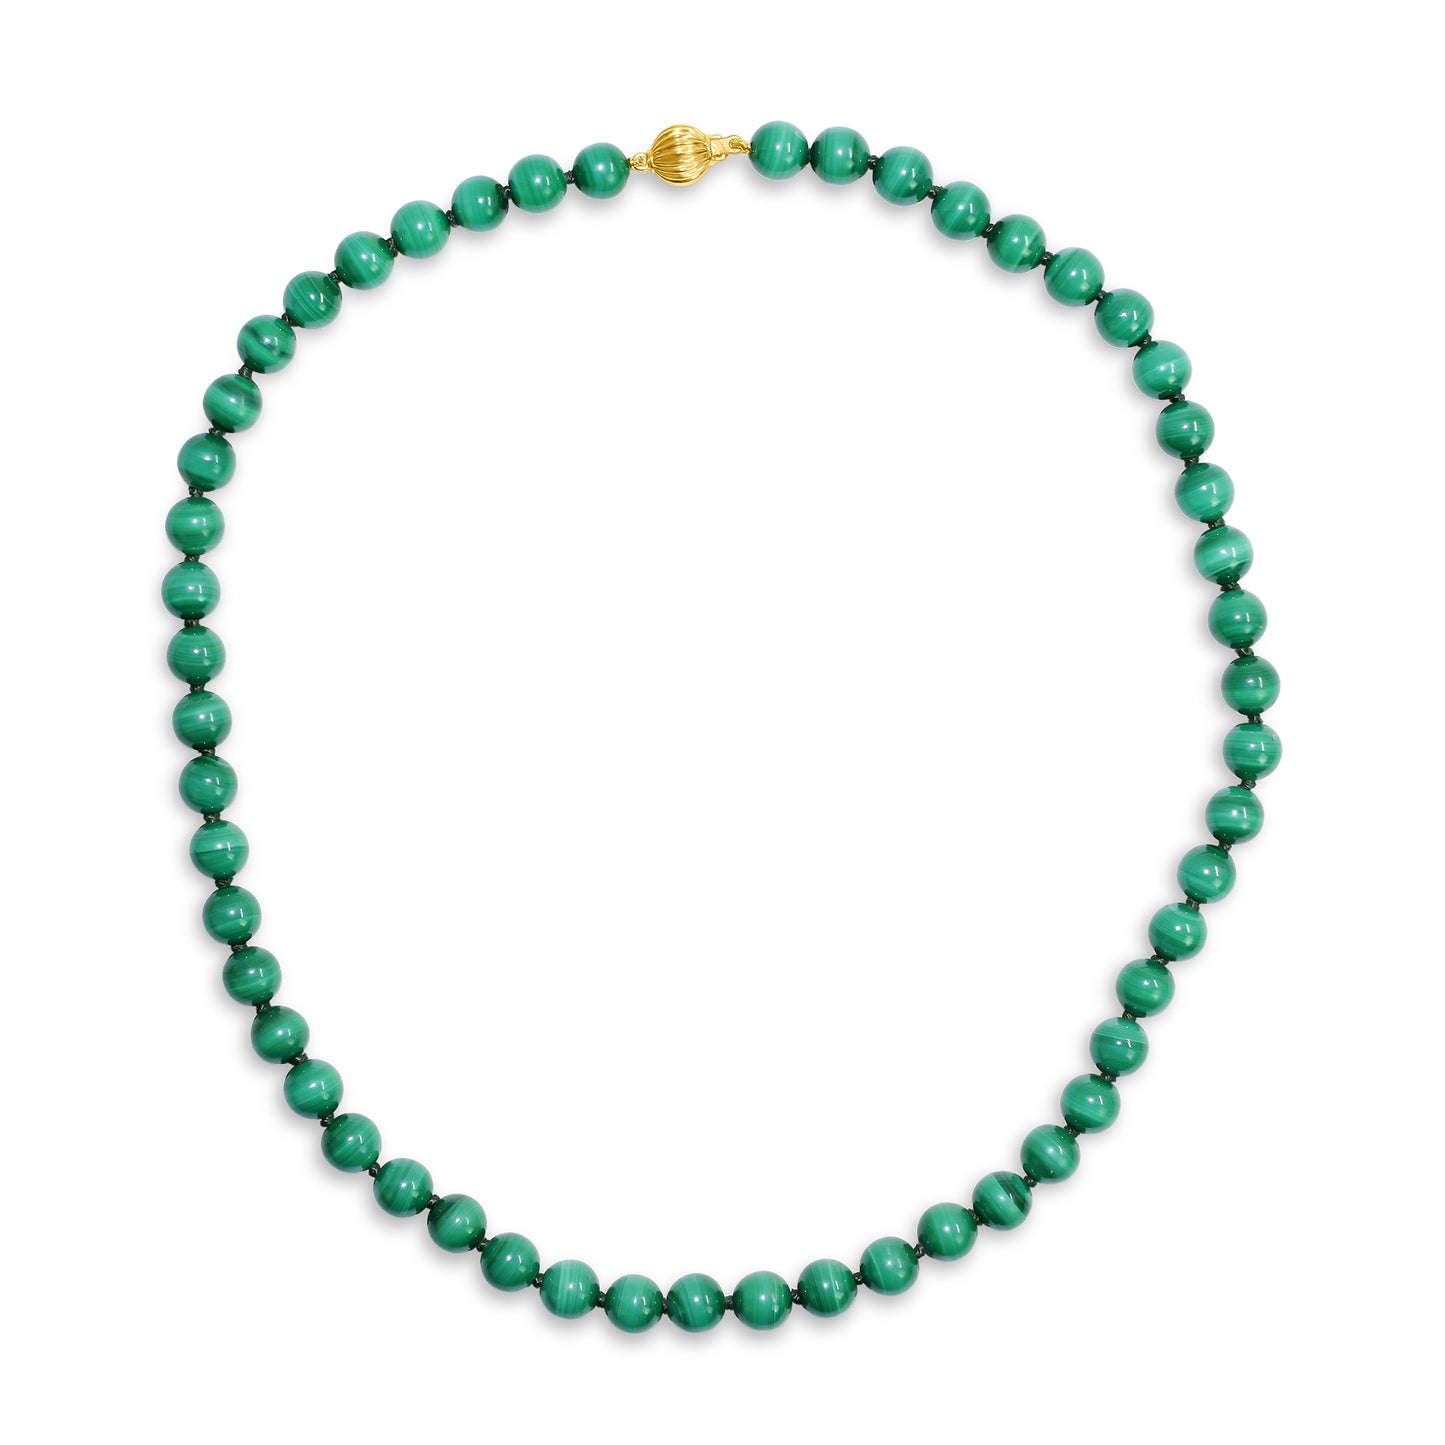 14k Malachite 8mm Round Knotted Necklace 18"